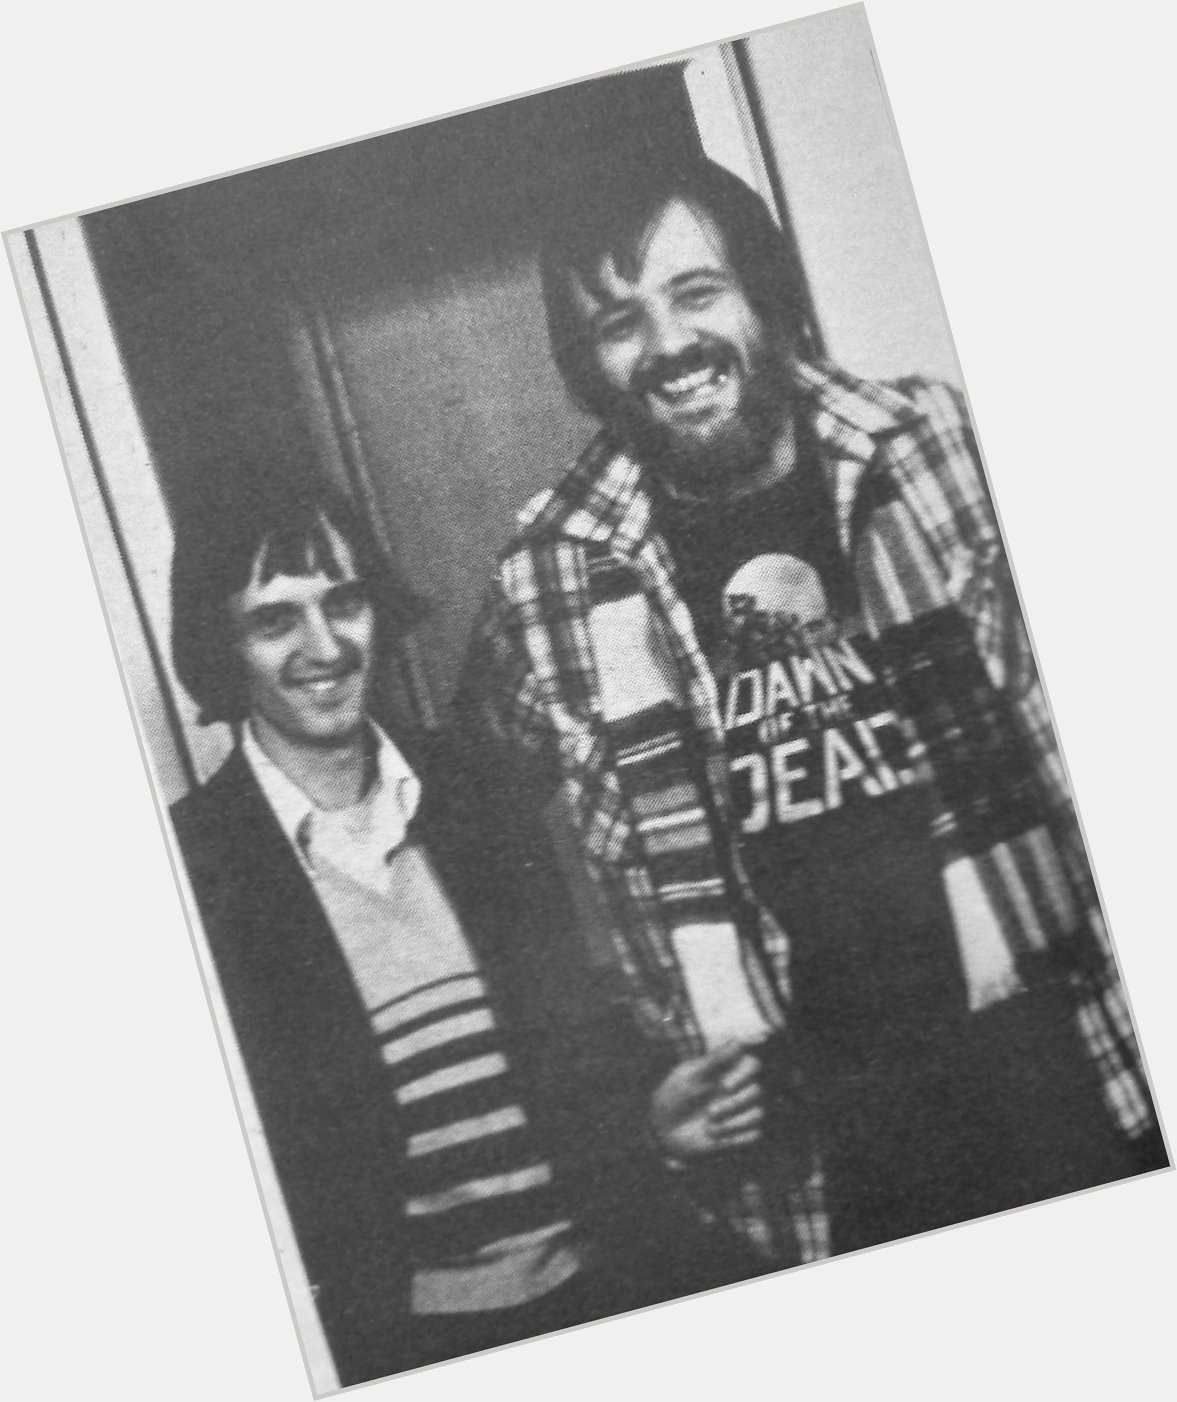 Happy Birthday DARIO ARGENTO! 
Seen here with George A. Romero during their 1979 co-production DAWN OF THE DEAD. 